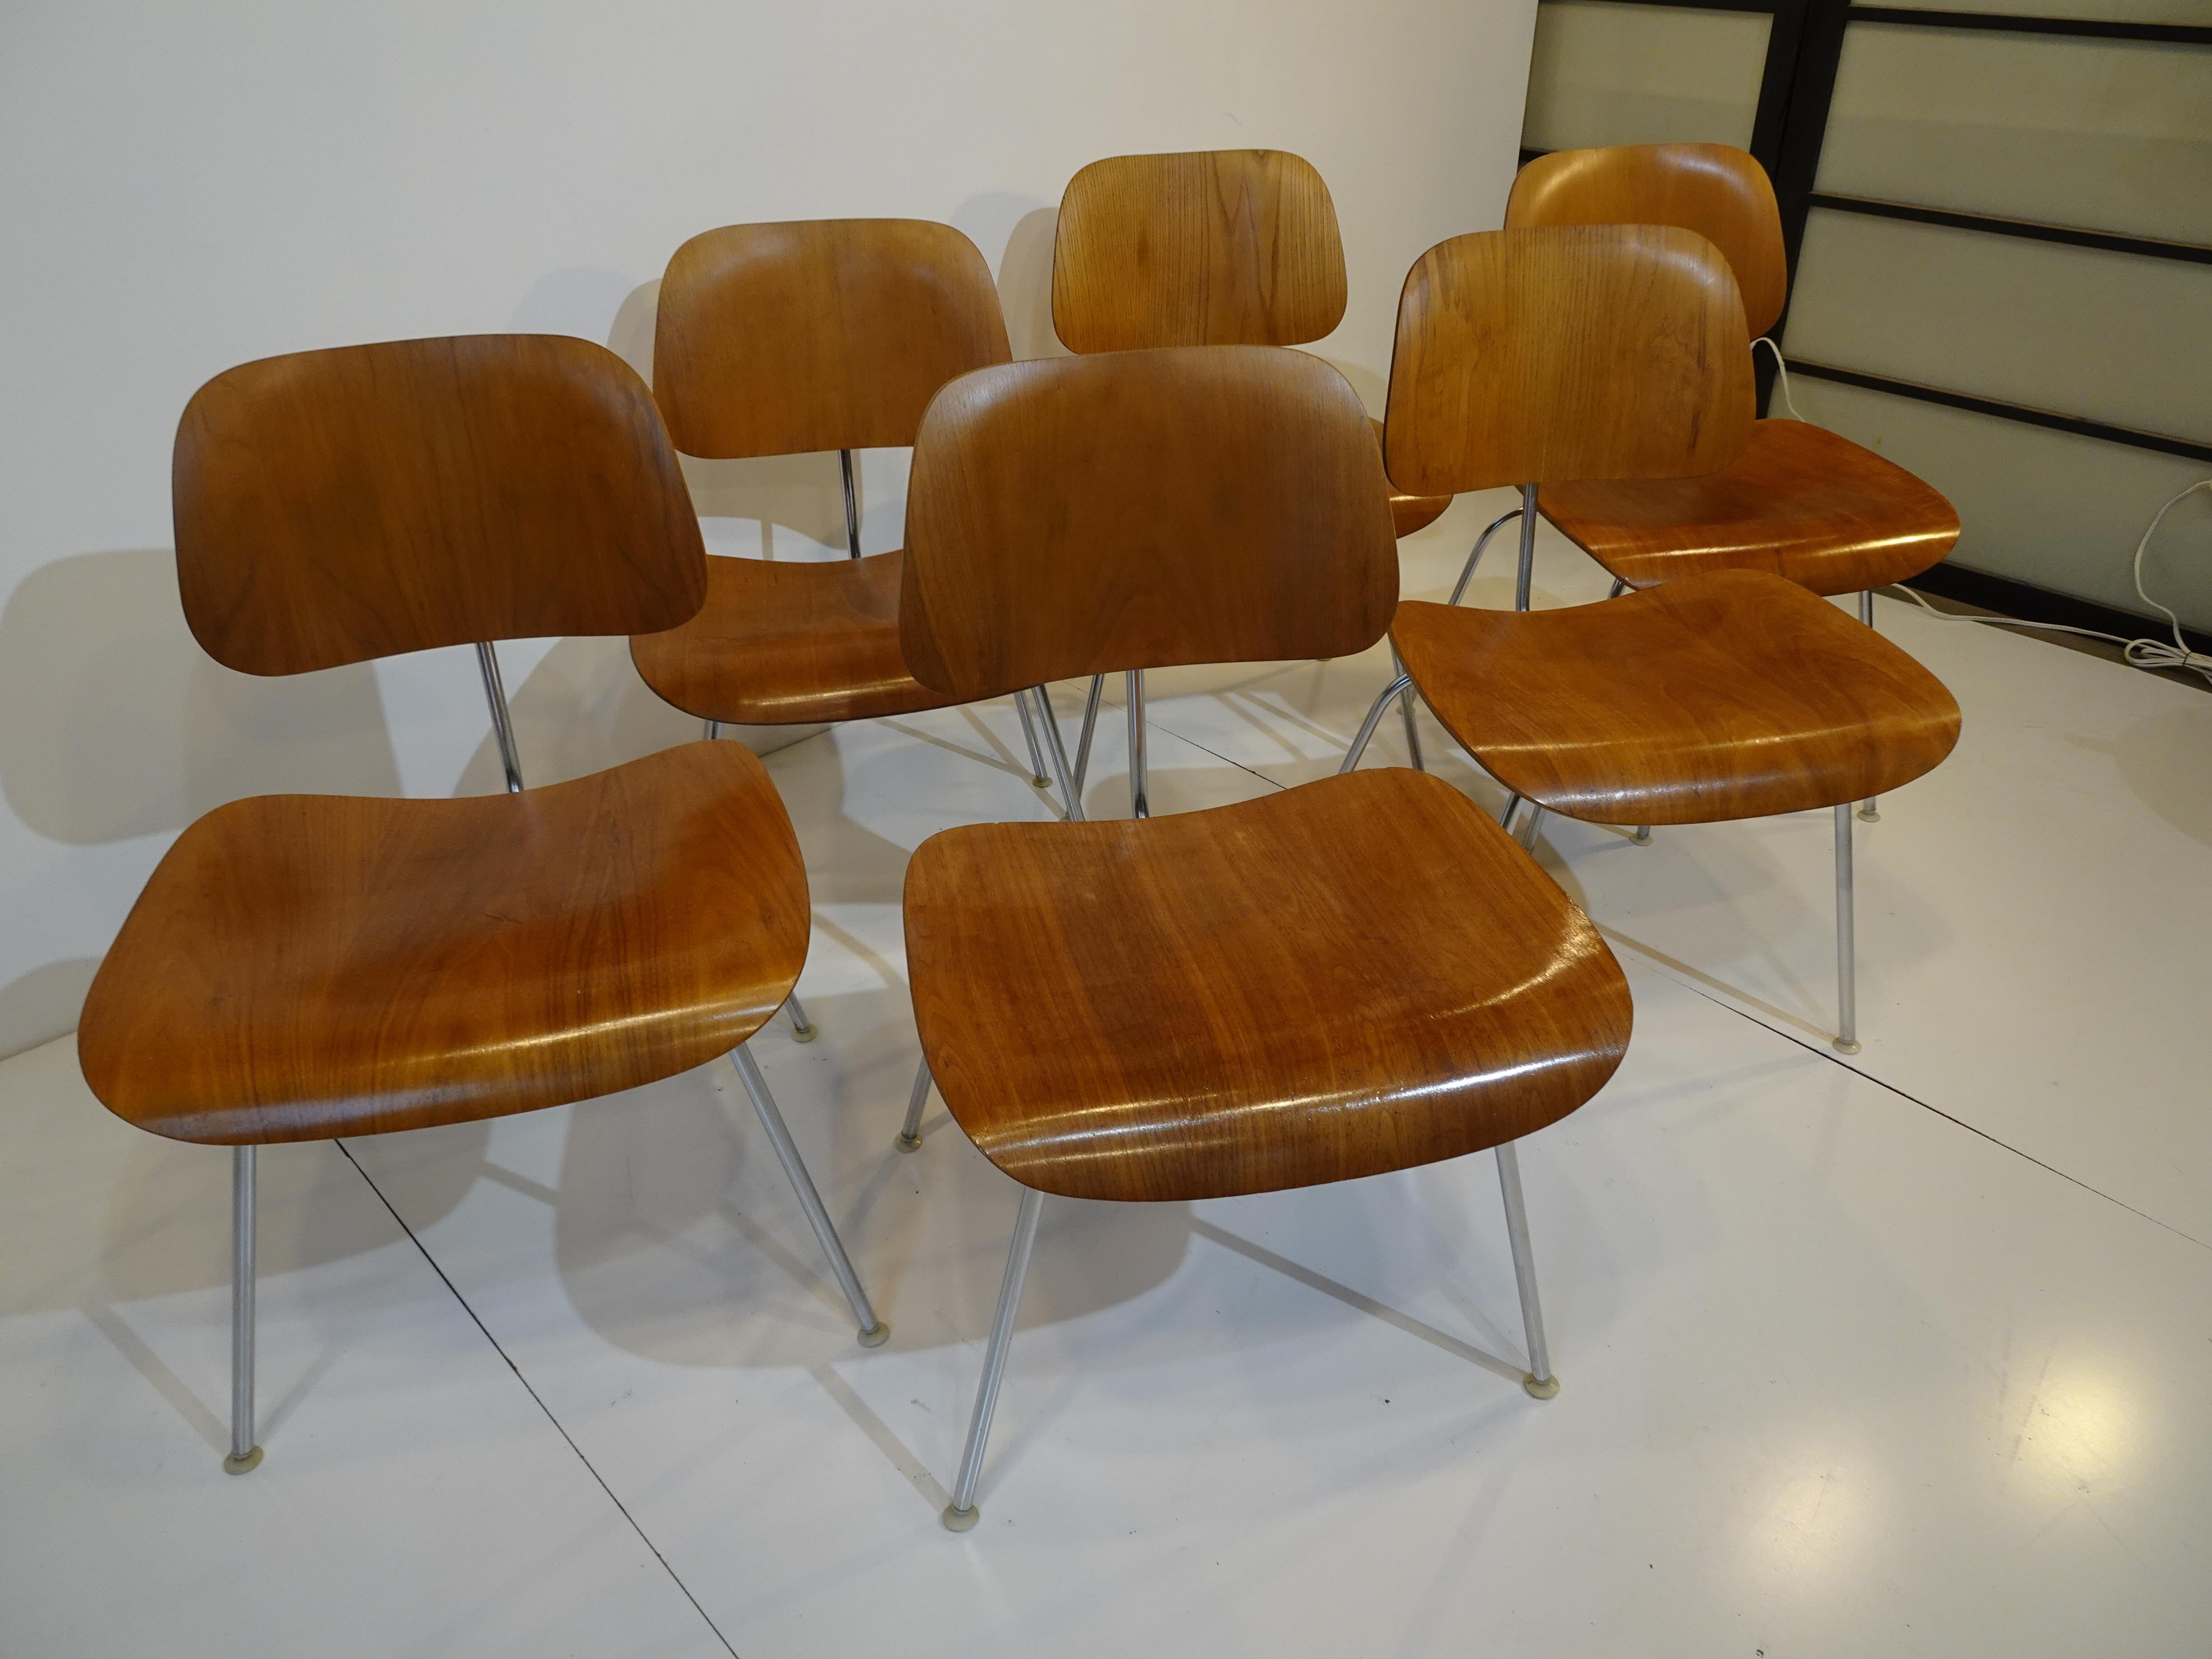 A set of six molded walnut ply DCM dining chairs with chromed metal frames having nylon foot pads to protect your floors . Some still retain the manufactures label to the seat bottom designed by Ray and Charles Eames for the Herman Miller furniture